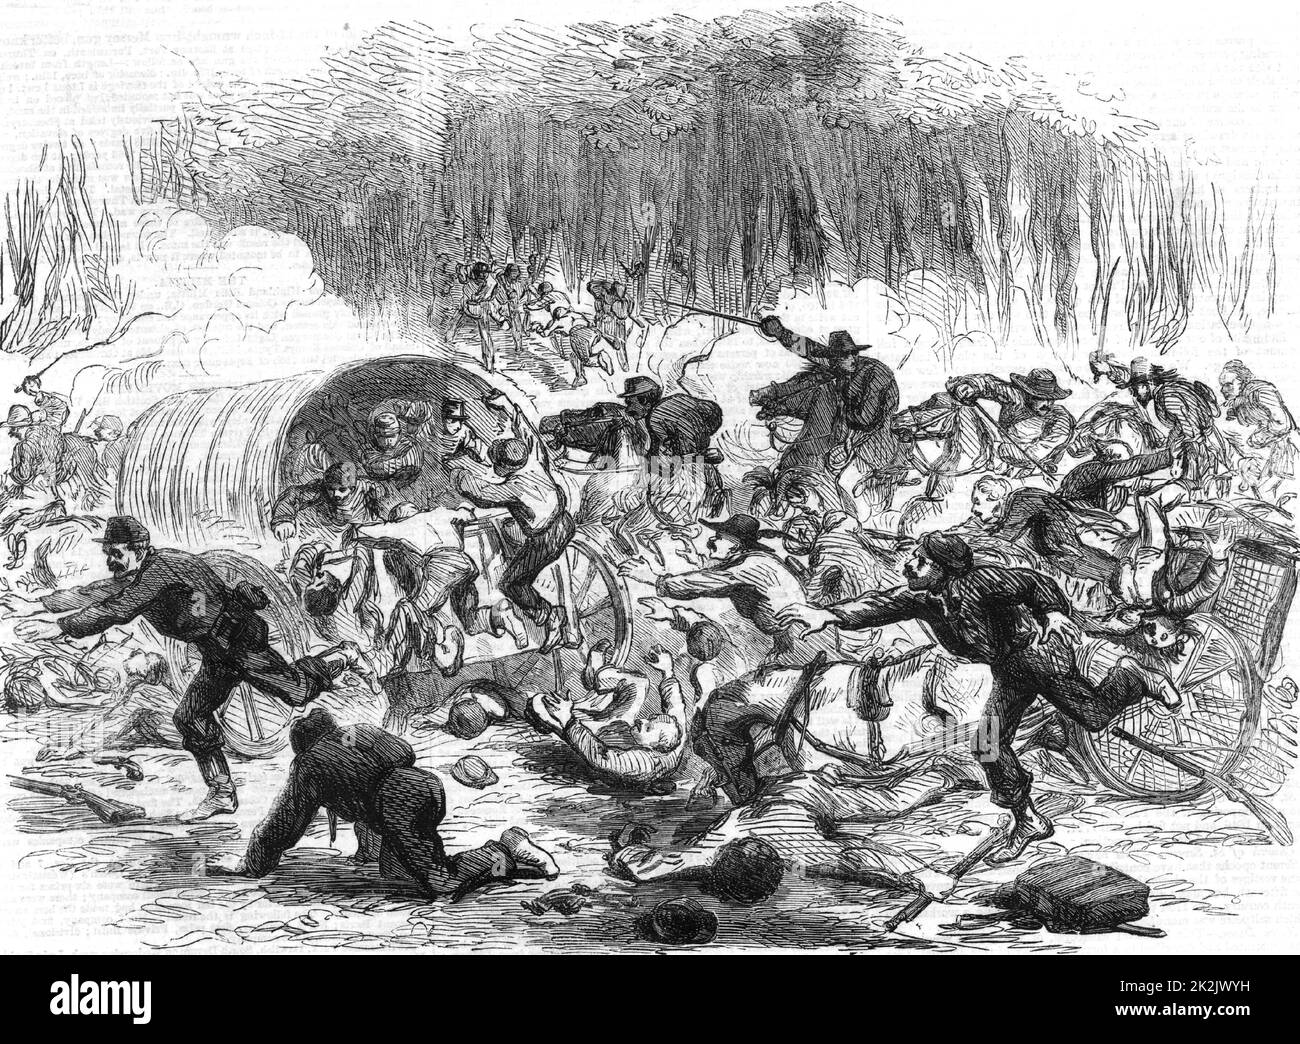 American Civil War 1861-1865. First Battle of Bull Run (Manassas, Virginia). Defeat and stampede of the Union troops, 21 July 1861. From 'The Illustrated London News' (London, 1861). Engraving. Stock Photo